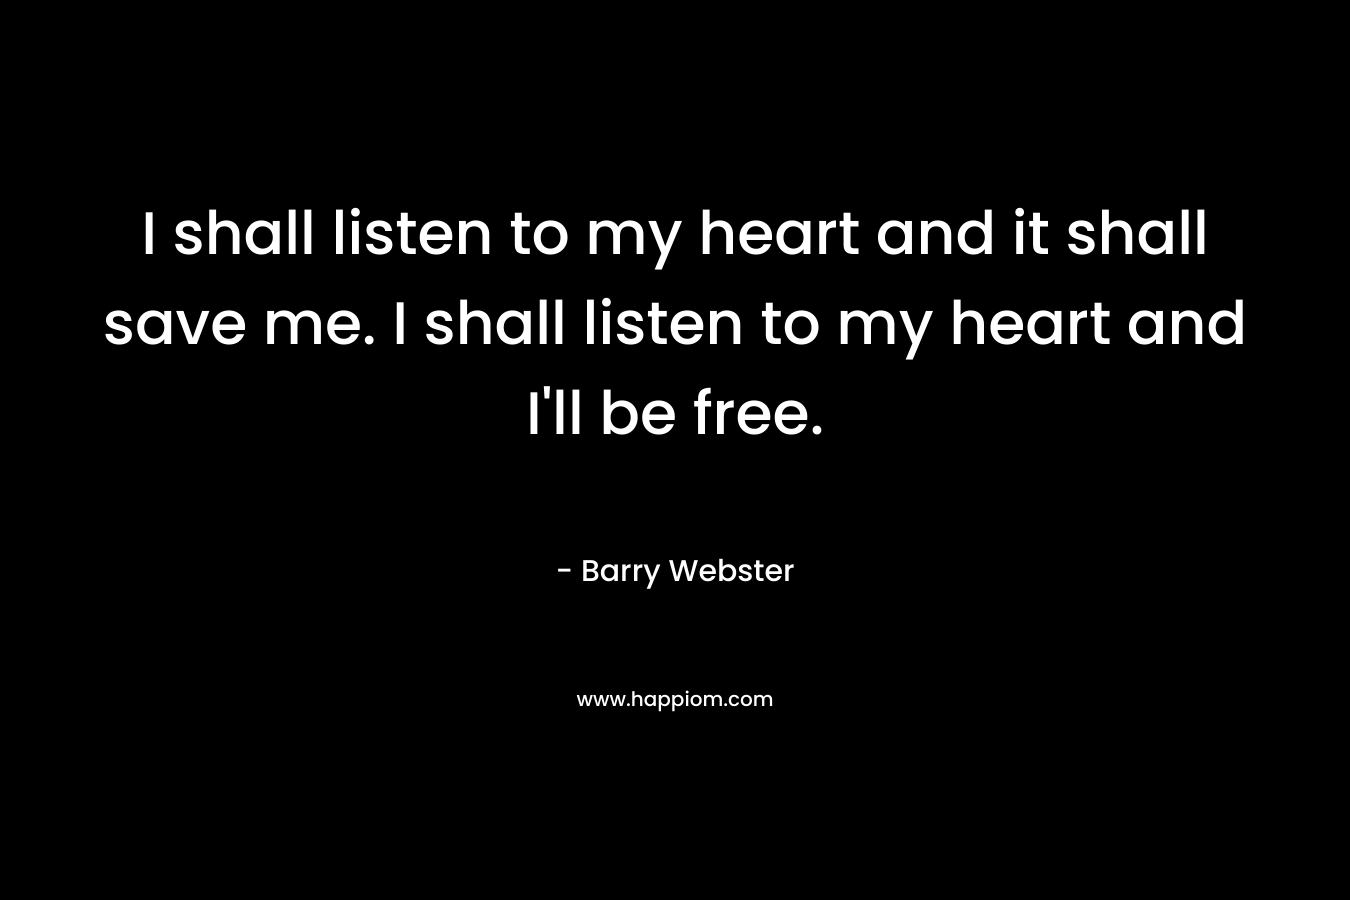 I shall listen to my heart and it shall save me. I shall listen to my heart and I'll be free.